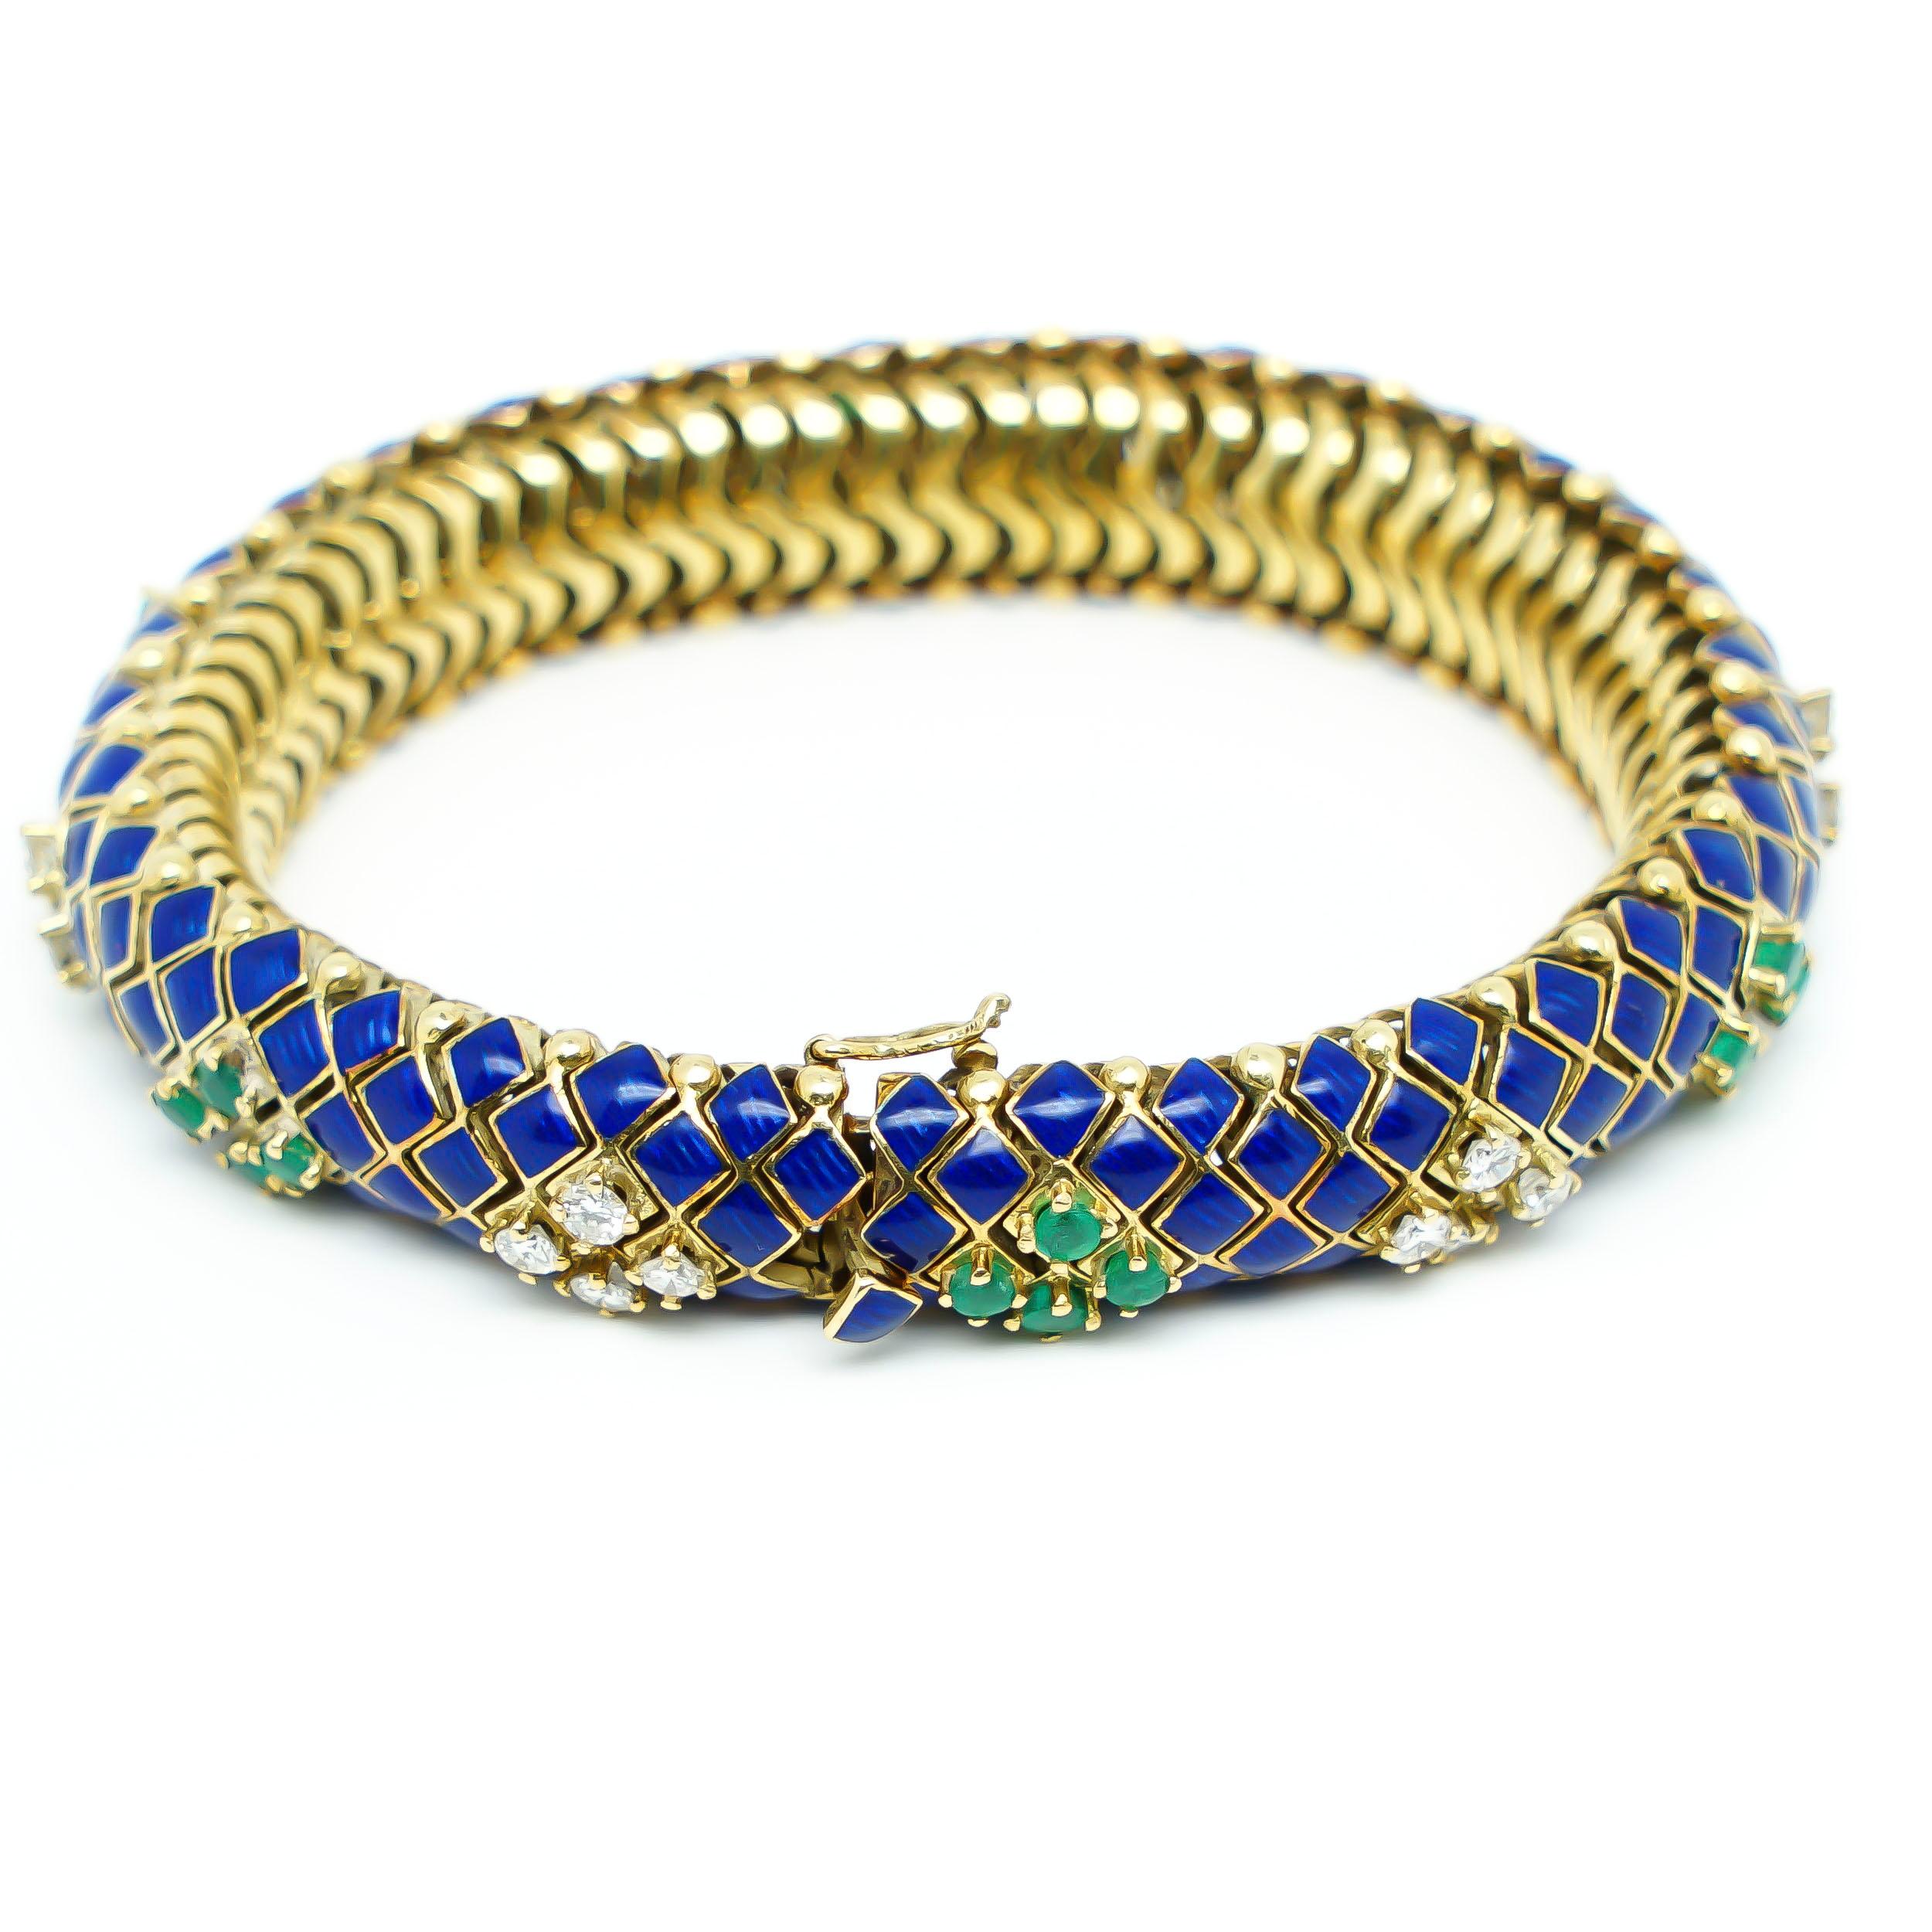 Bracelet with Diamonds in Gold 18 Karats Emeralds and Blue Polish. Reminding a Snake, due to its shape and colors, it's a piece that has a strong and Original Design with a beautiful detailed frame totally Handcrafted that makes it Unique and a real